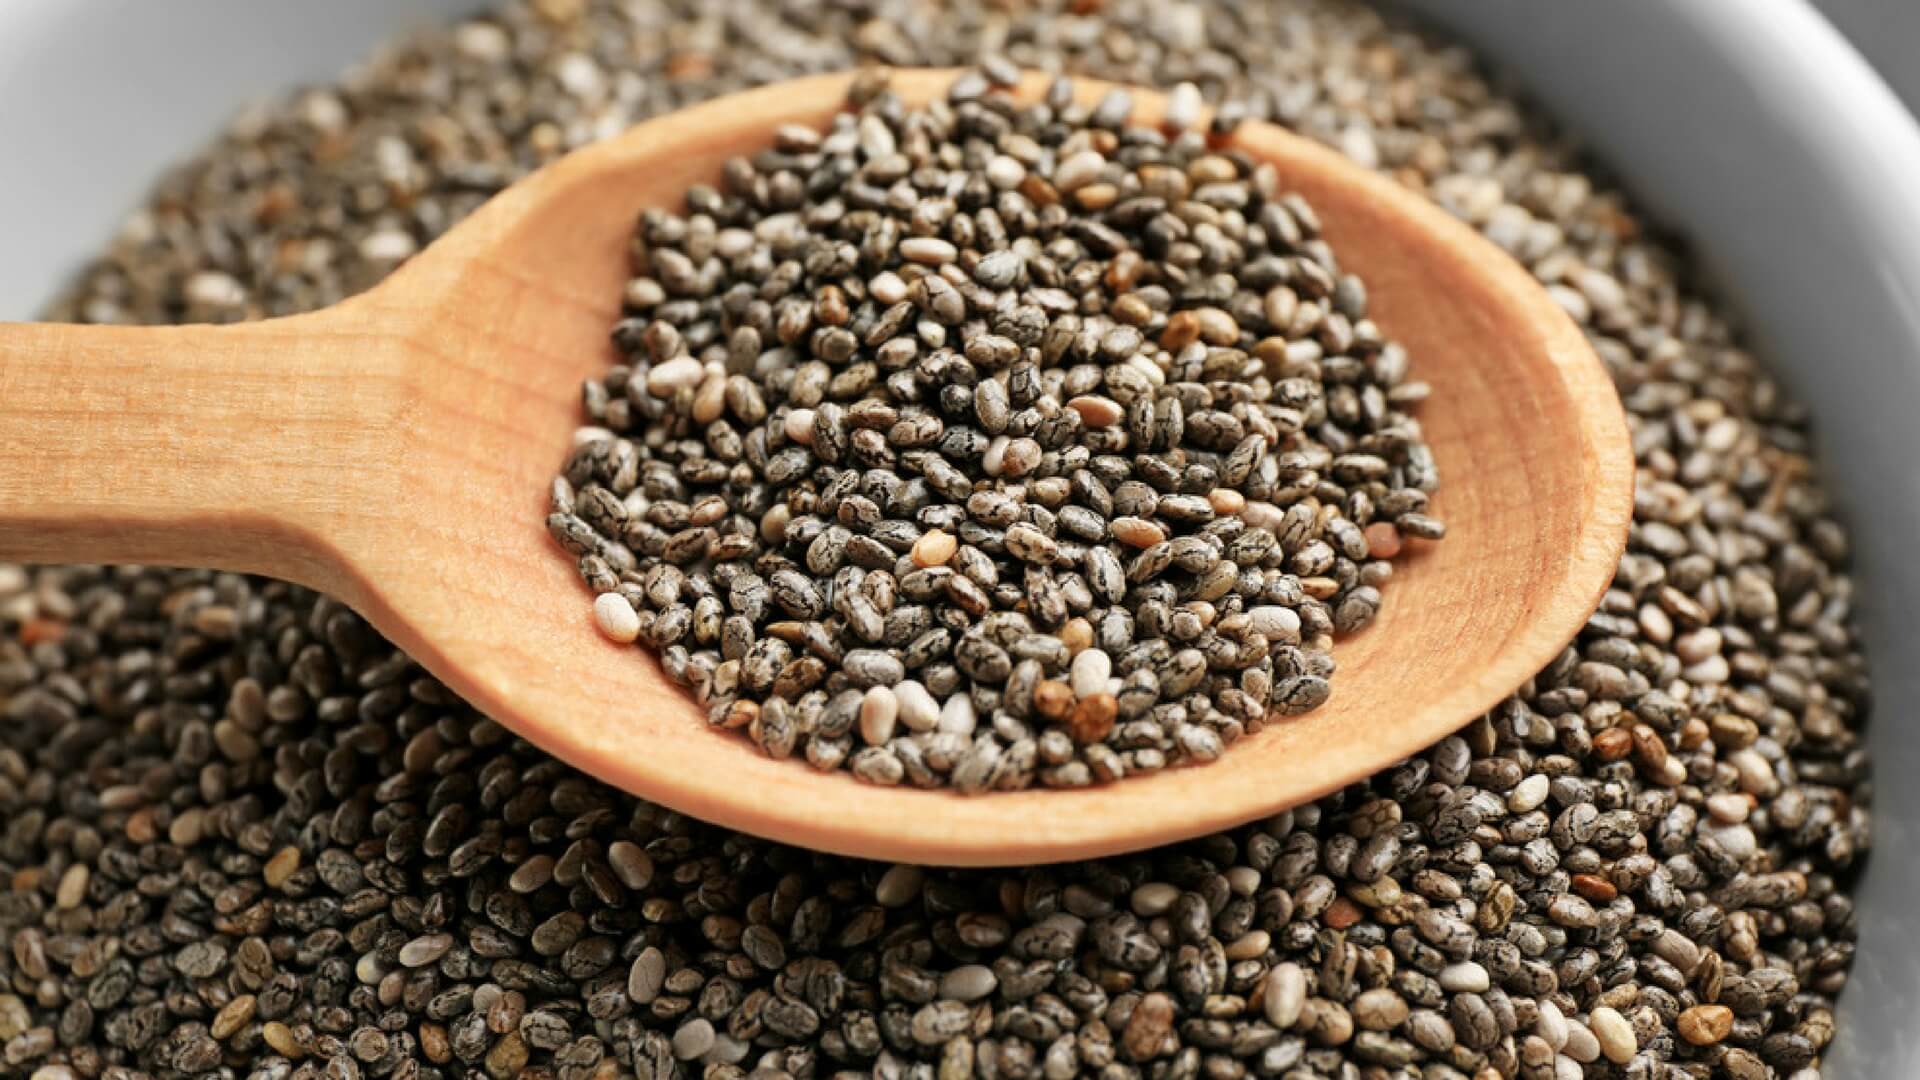 Foods-that-control-Diabetes-Chia-seeds